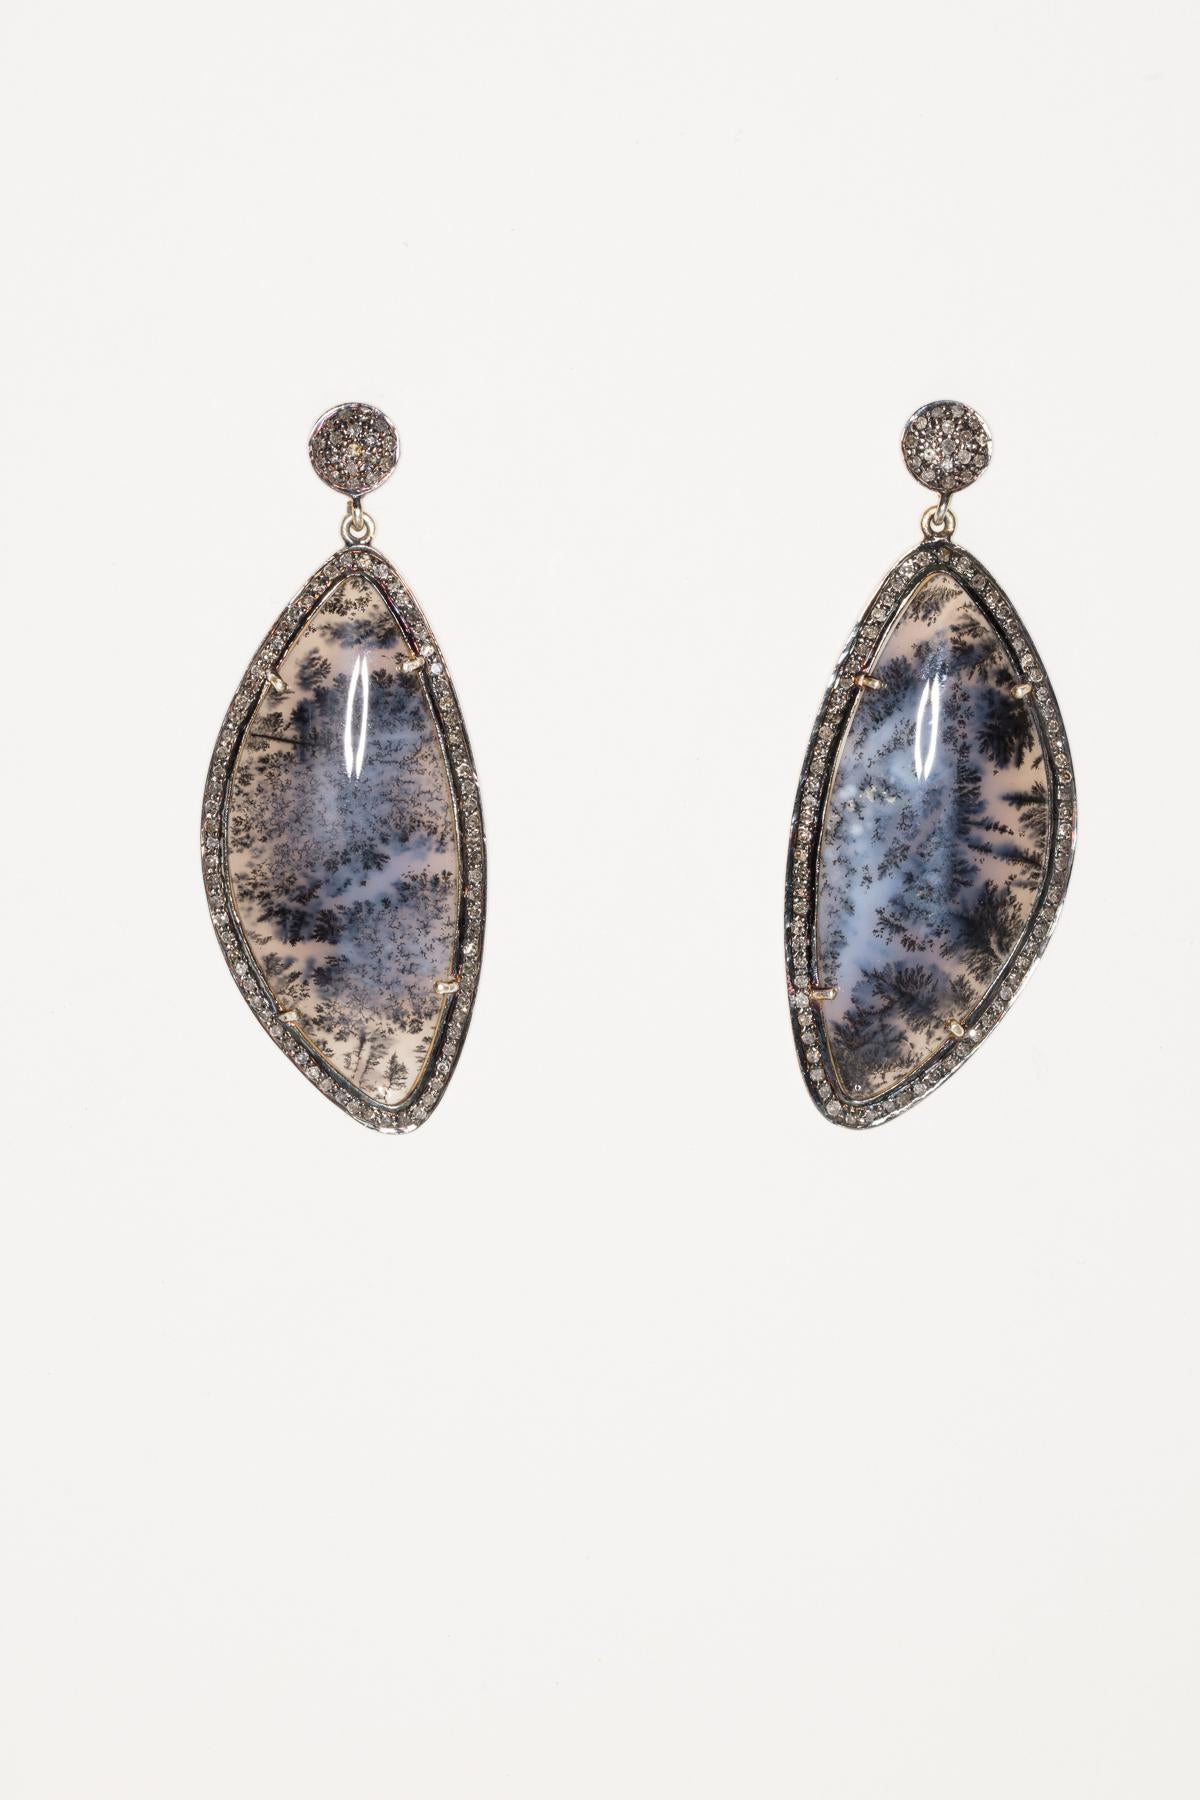 Lovely moss agate set in oxidized sterling silver with pave`-set diamonds around the border and the top of the post.  For pierced ears with 18K gold post.  Weight of diamonds is 1.99 carats and moss agate is 39 carats.